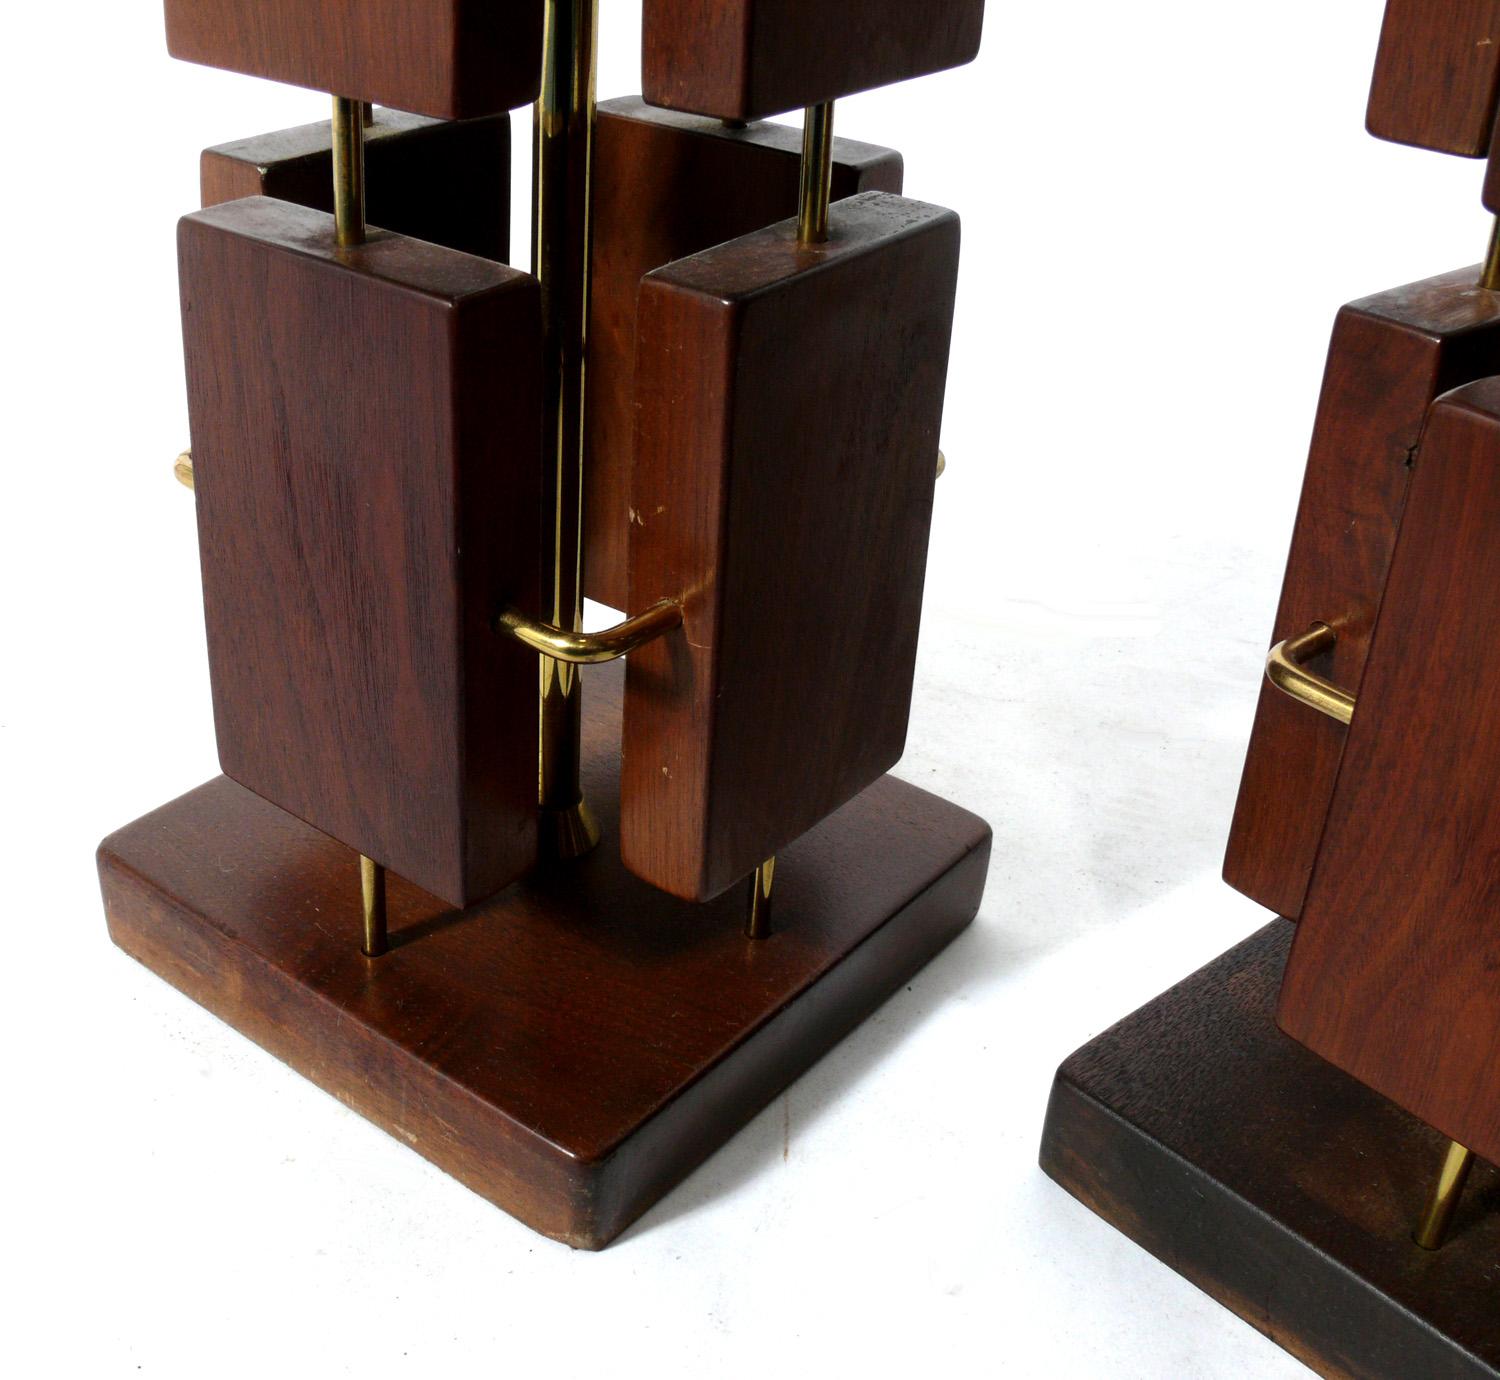 American Pair of Sculptural Walnut and Brass Mid-Century Modern Lamps For Sale